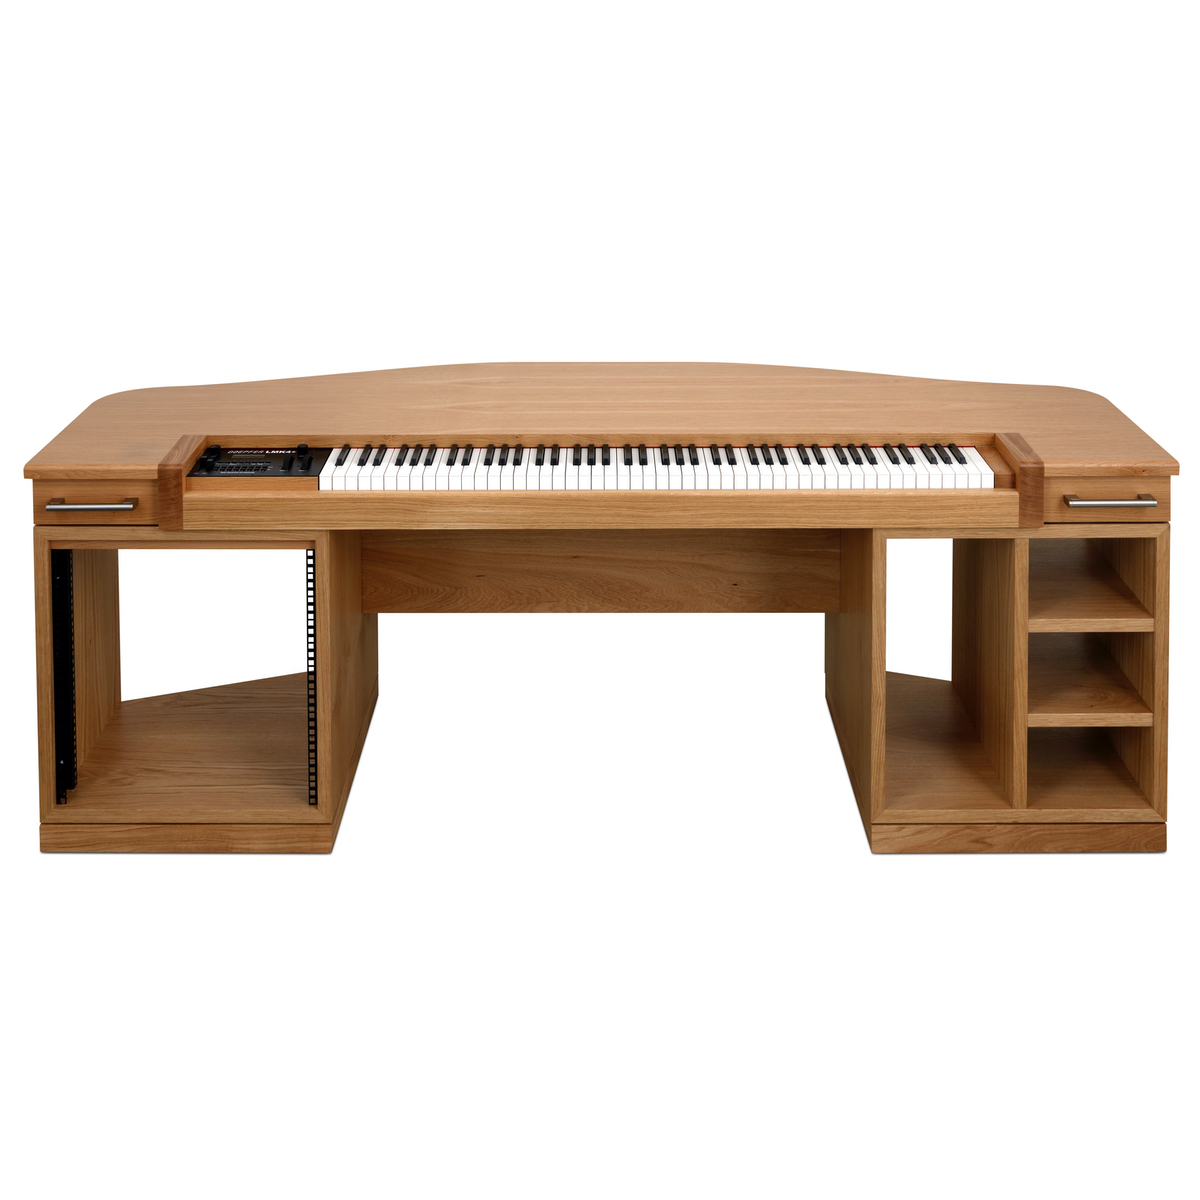 In our latest #JustAPhase blog we debate the features of THE PERFECT WORKSTATION... justaphase.blog/home/2022/3/9/… #Composer #StudioFurniture #ComposerFurniture